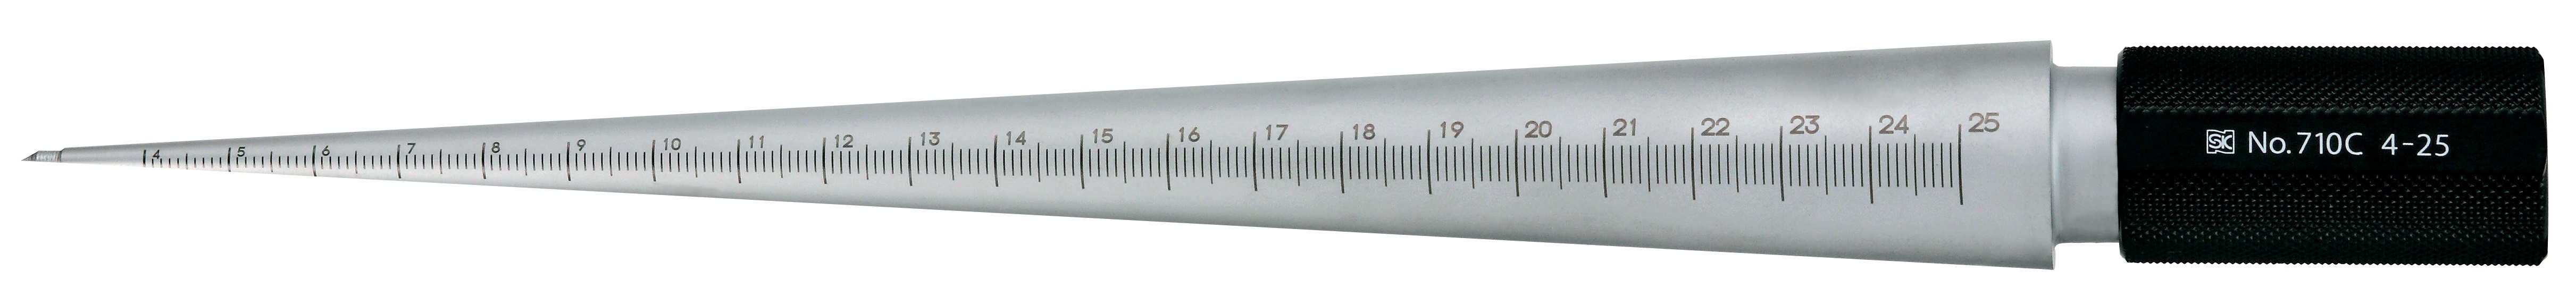 Taper Gauges - Cylindrical for Hole Size Measuring, Silver Finish, TPG 710